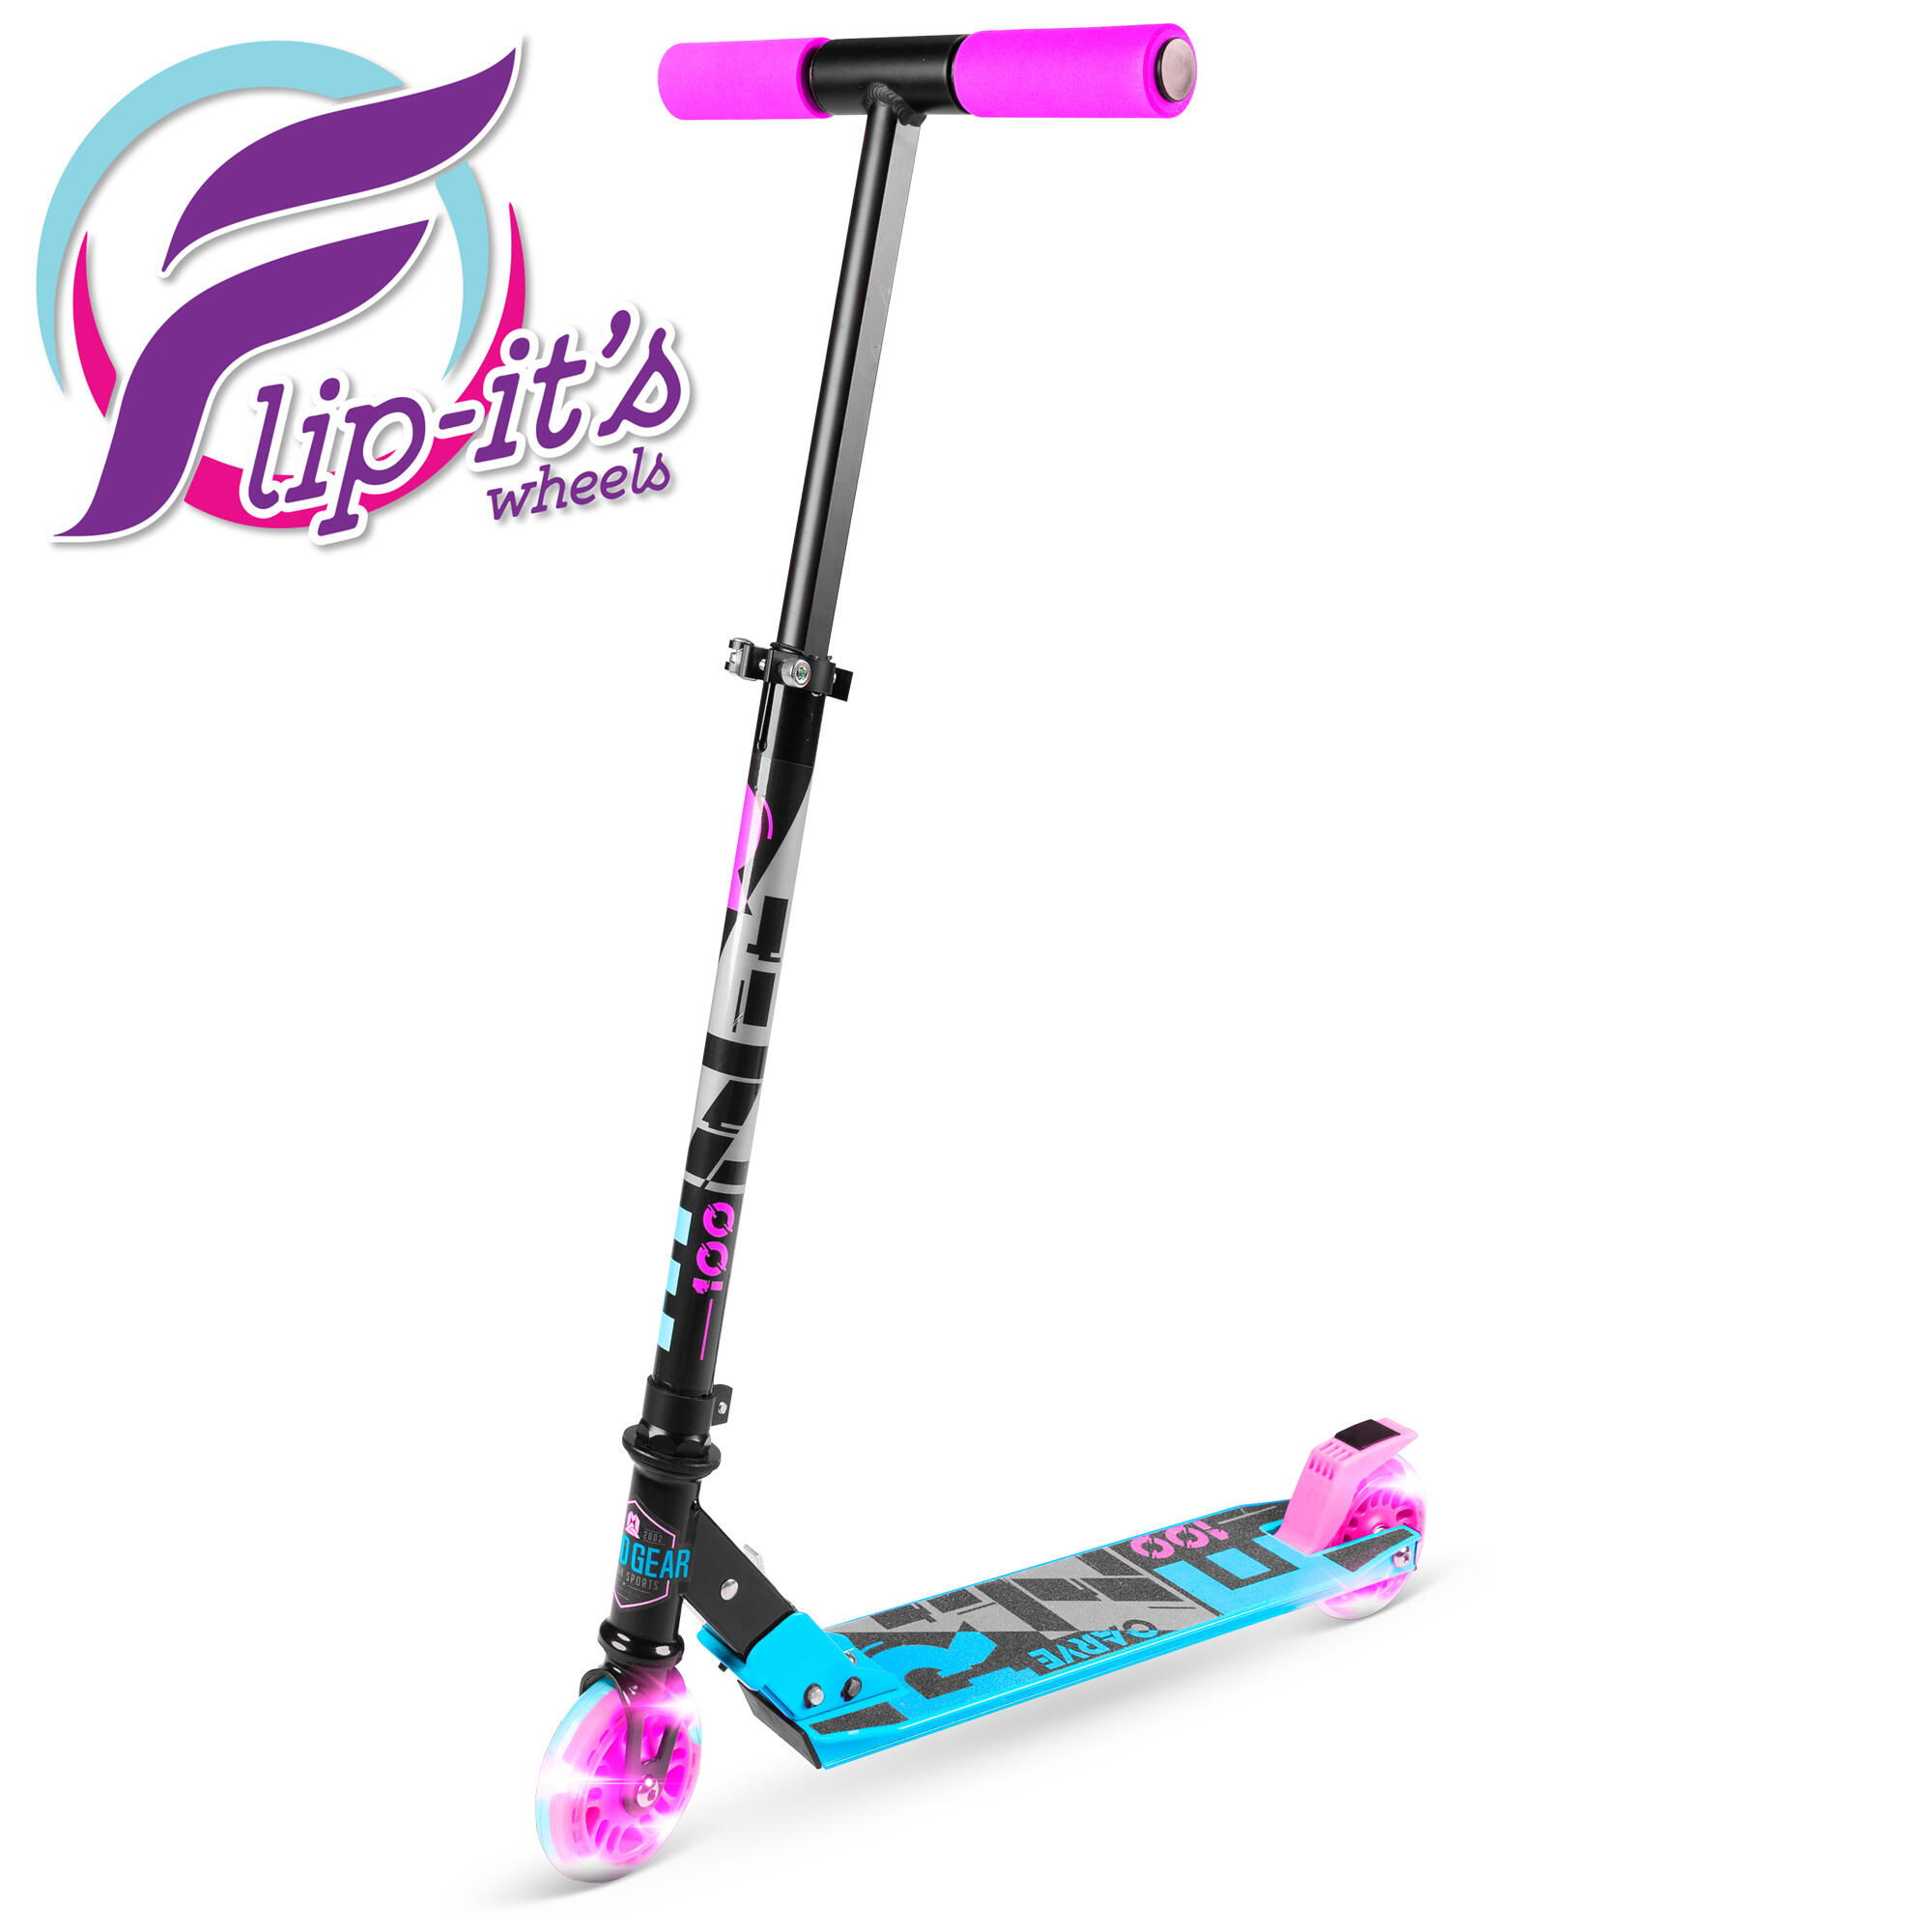 MADD GEAR CARVE RIZE LIGHT UP WHEEL SCOOTER – AGES 3 YEARS+ - DREAMS 1/8